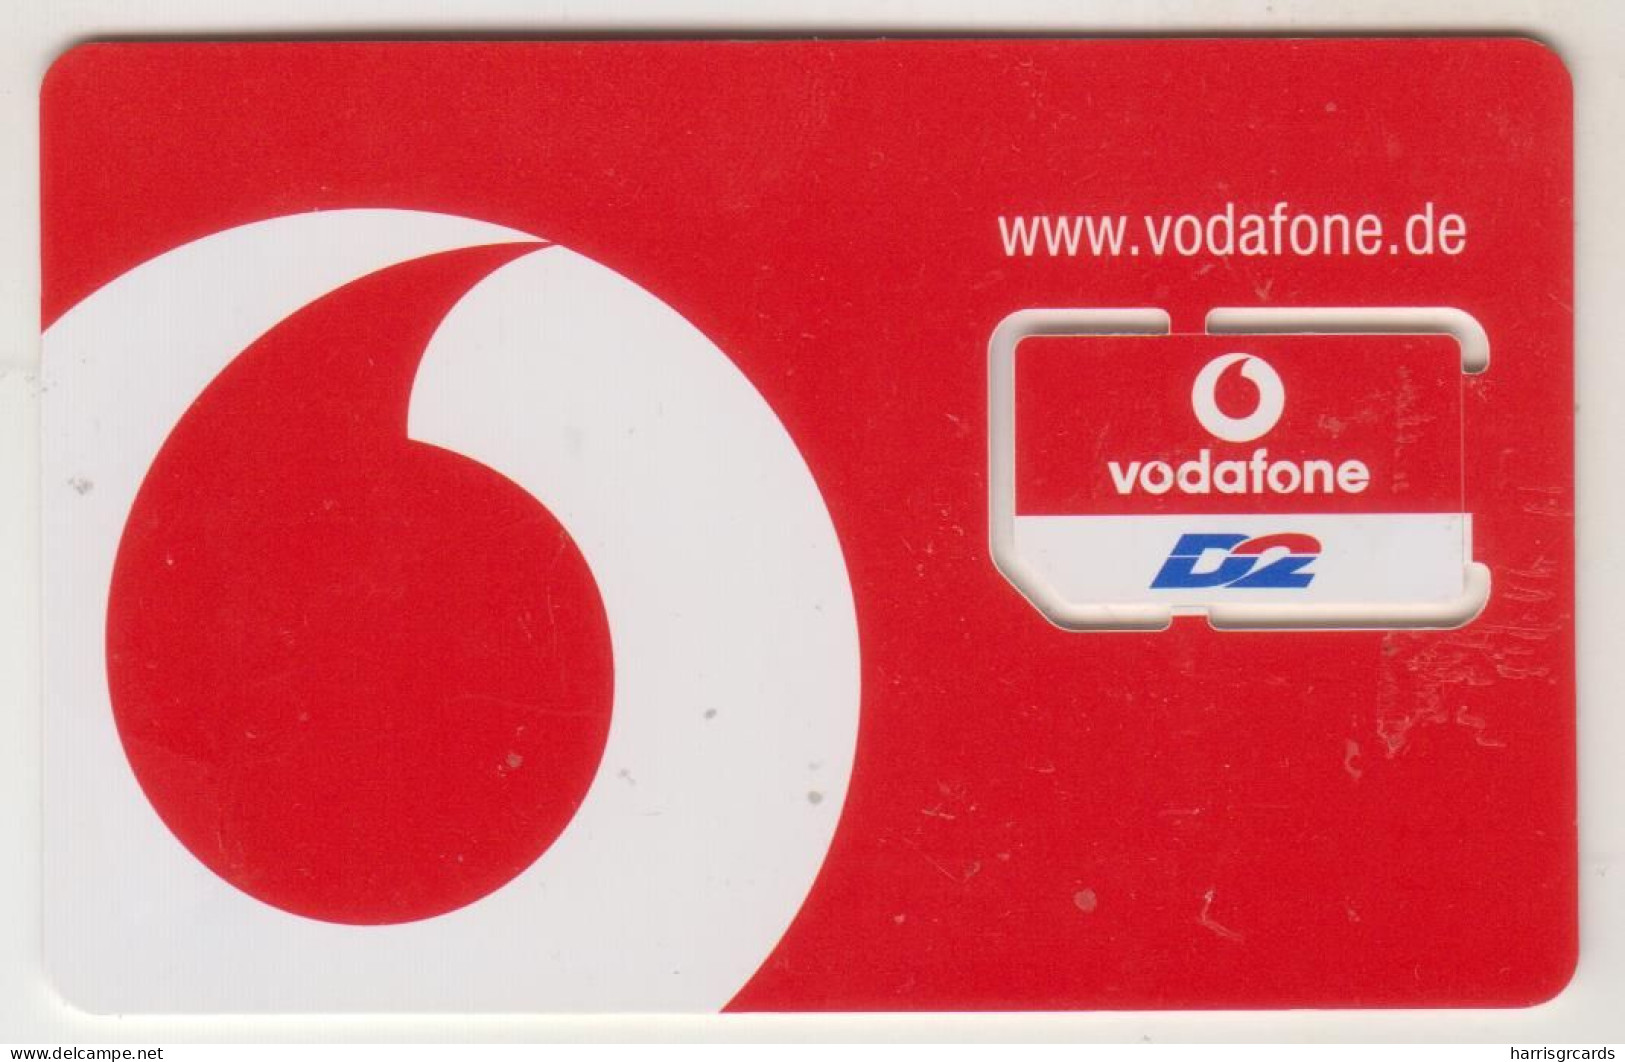 GERMANY - How Are You? , Vodafone GSM Card , Mint - [2] Prepaid